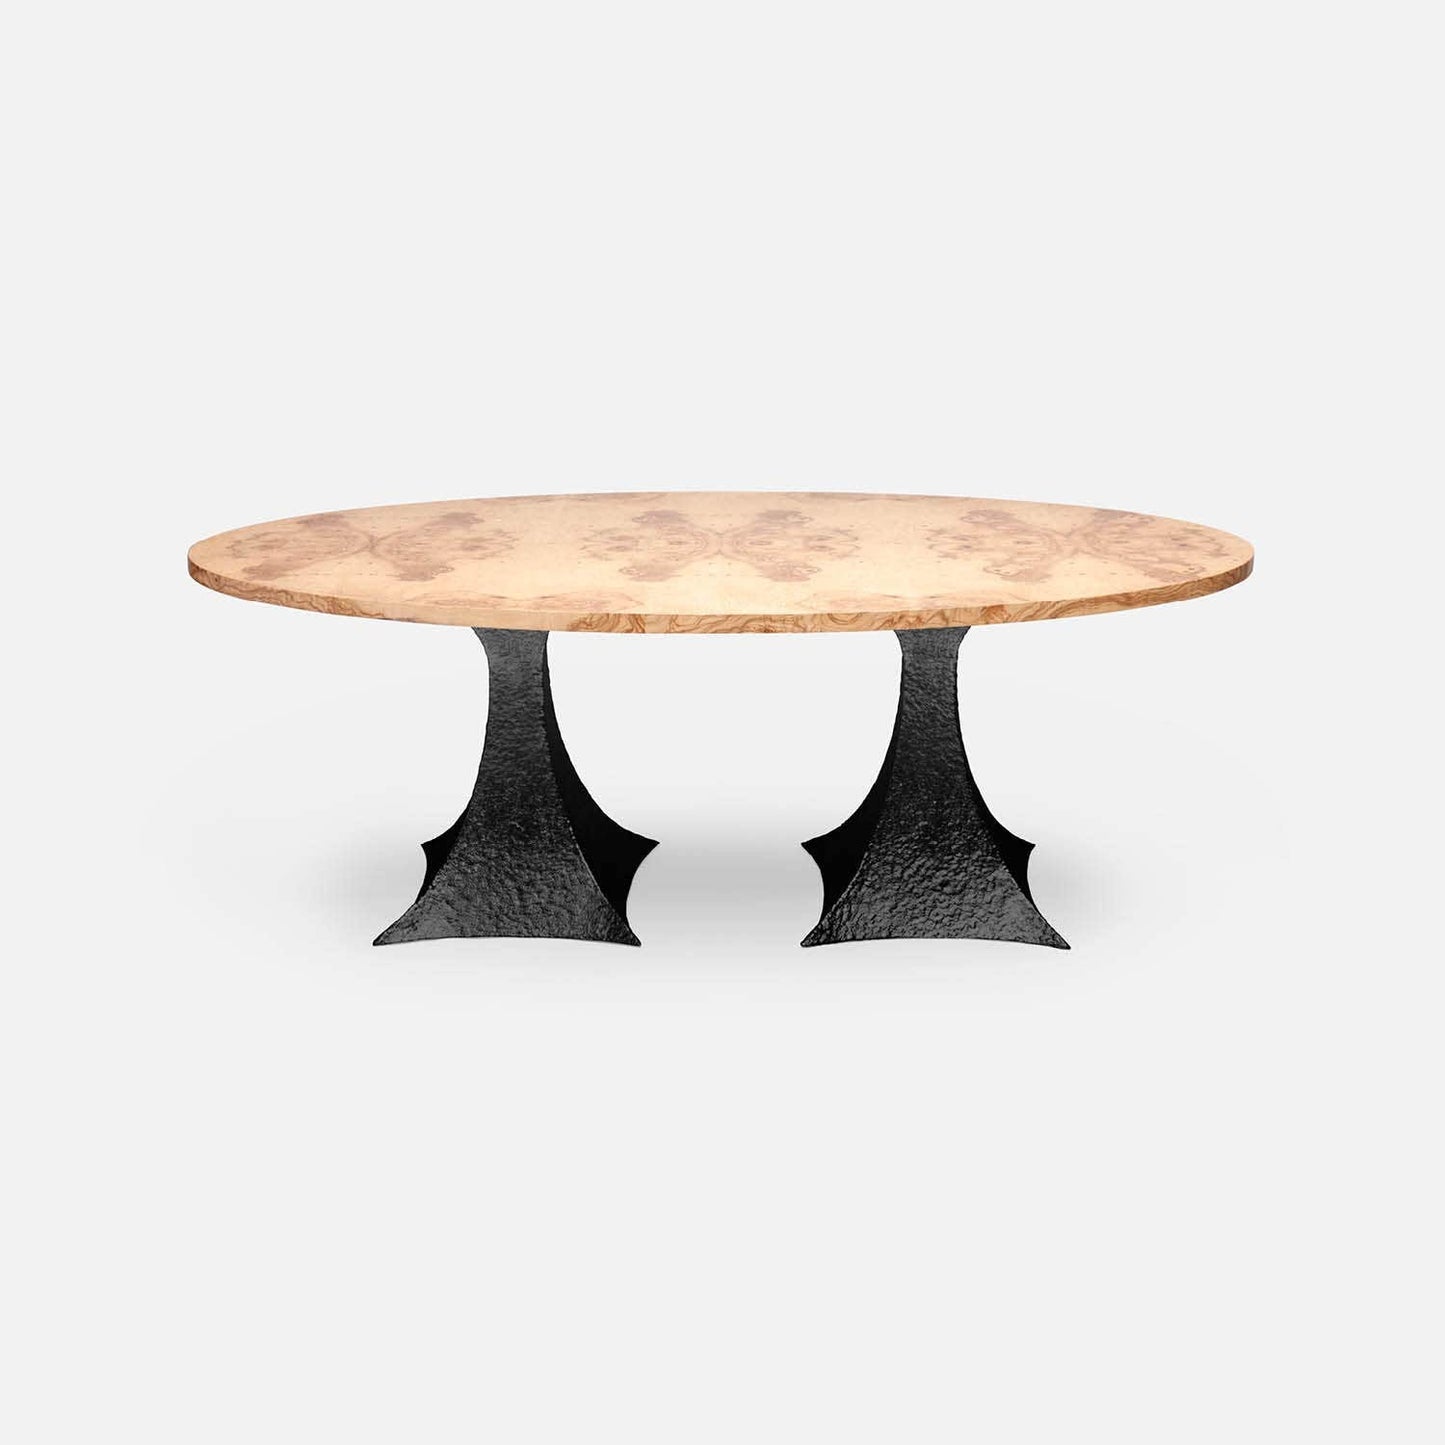 Made Goods Noor 84" x 42" x 30" Double Base Bumpy Black Iron Dinning Table With Oval Ivory Faux Horn Table Top